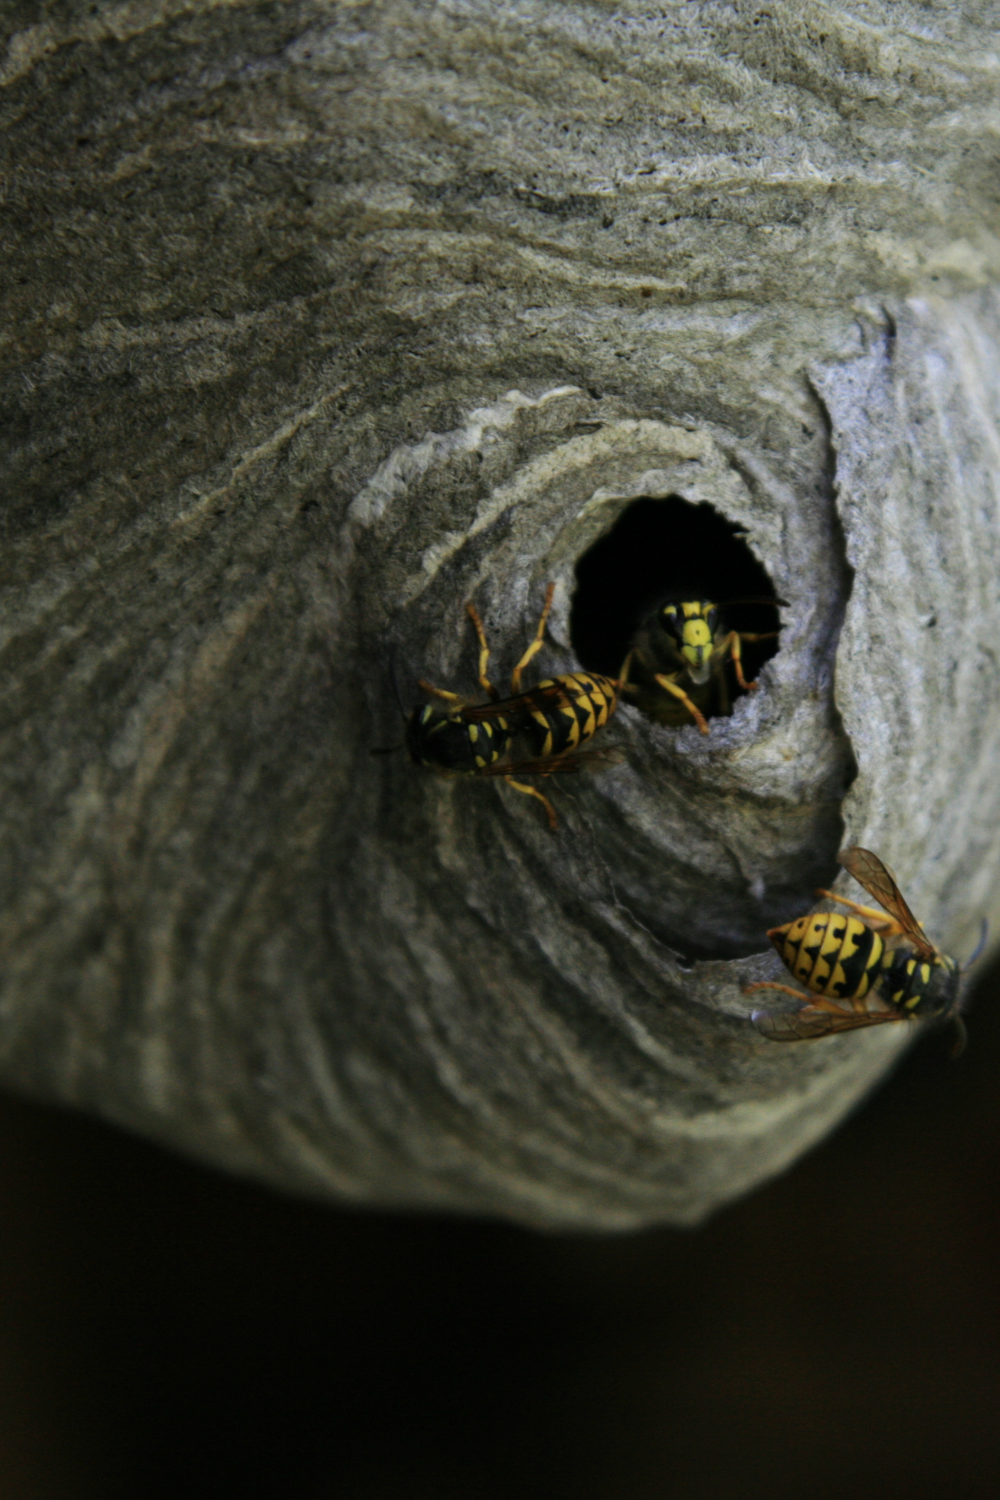 wasp nest with wasps moving in and out